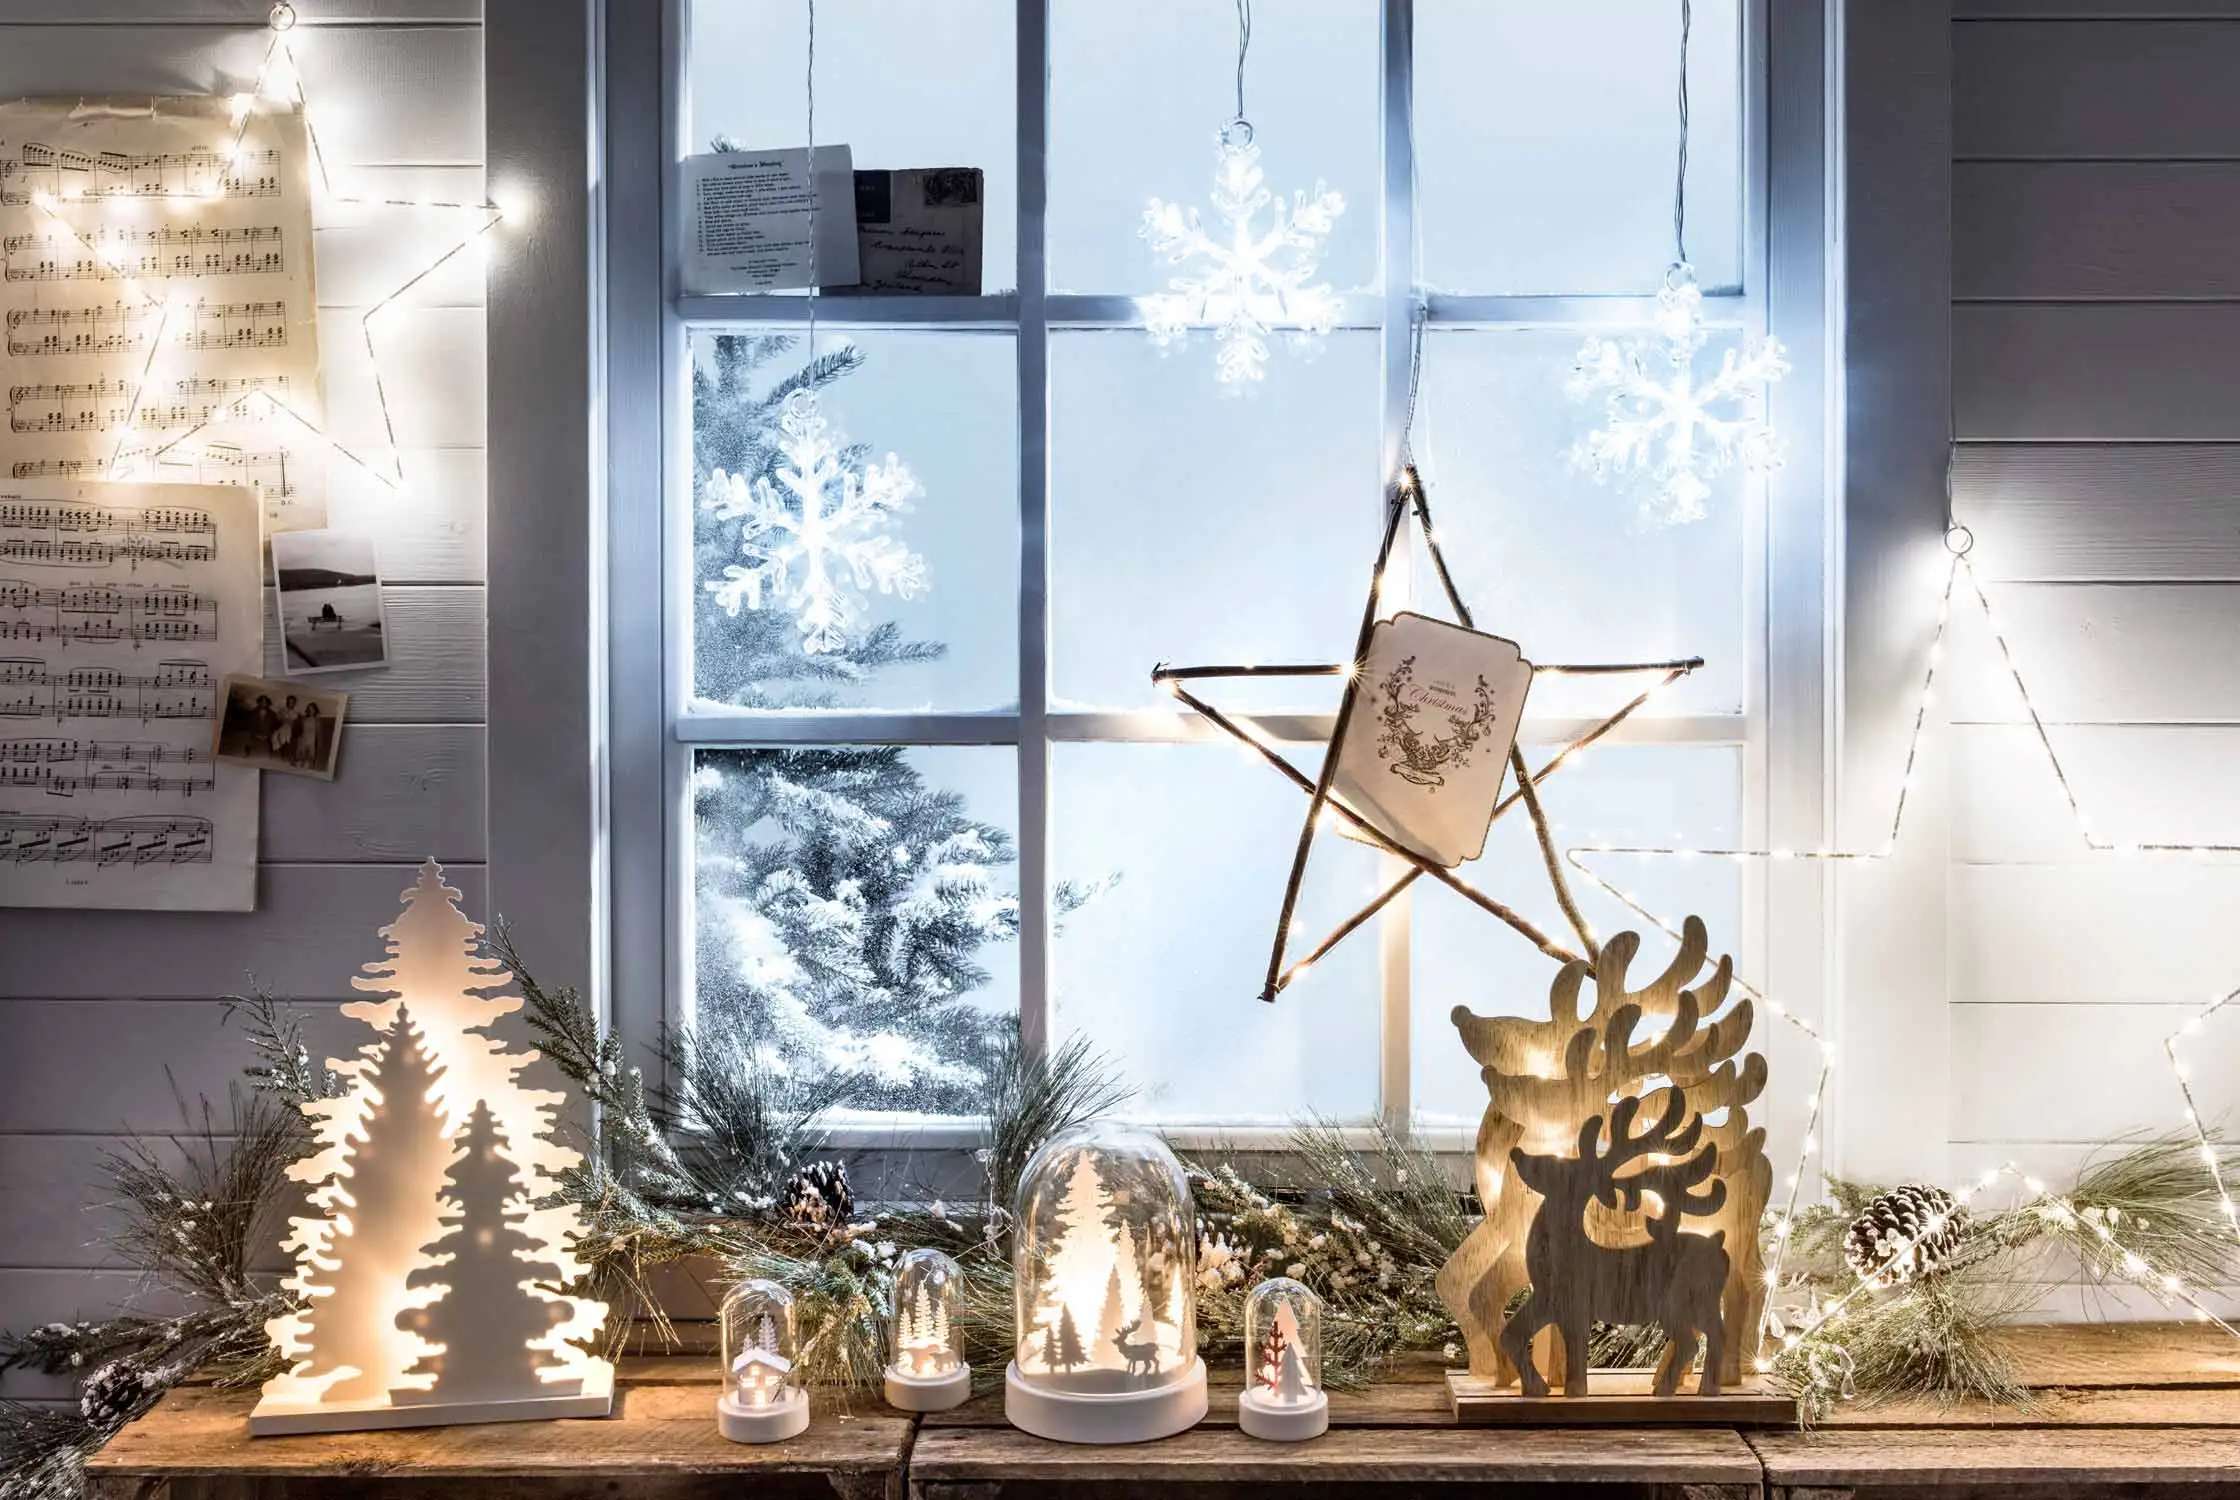 How to decorate your window for Christmas